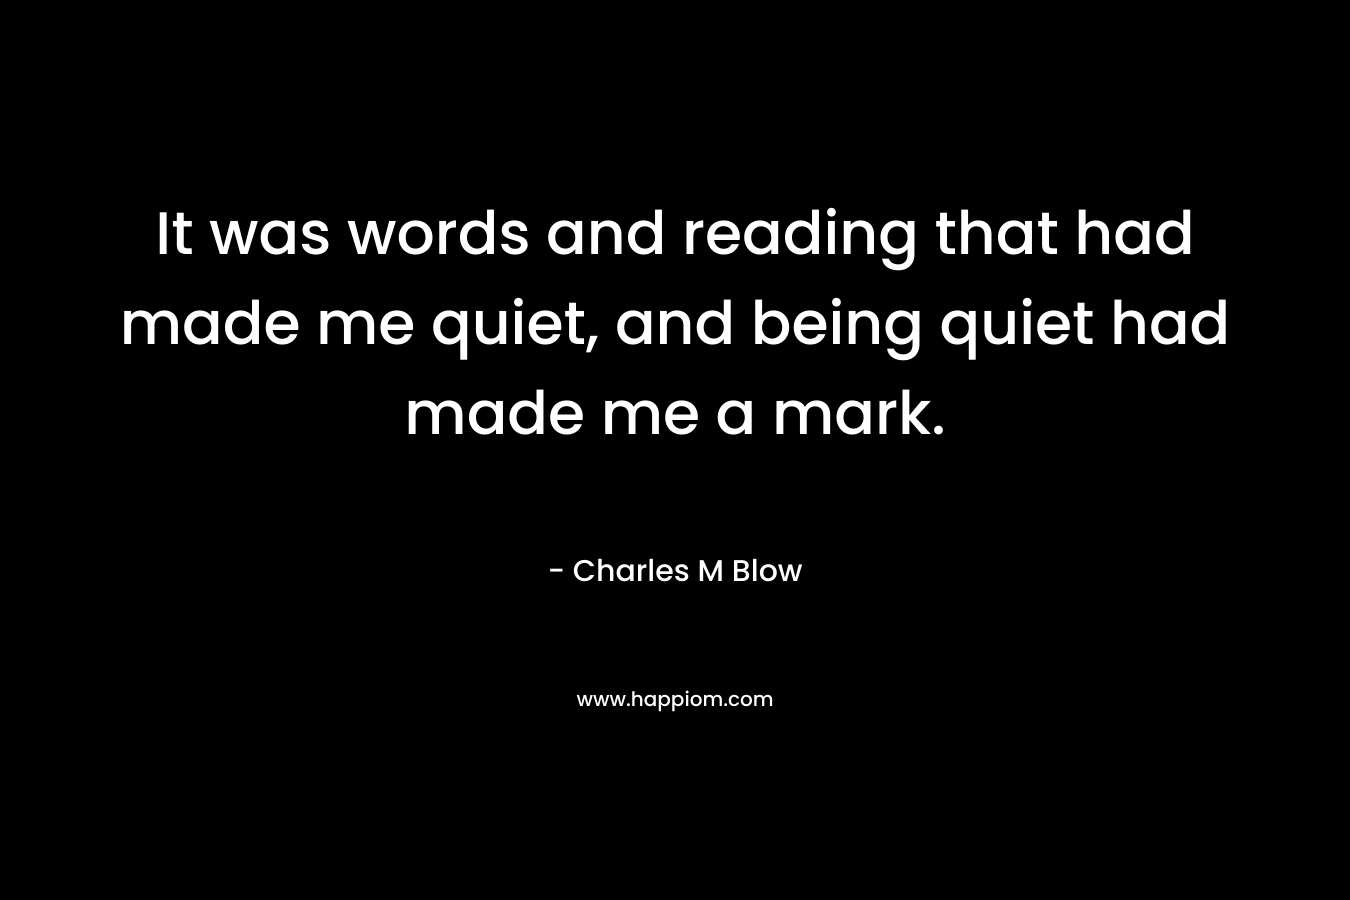 It was words and reading that had made me quiet, and being quiet had made me a mark.